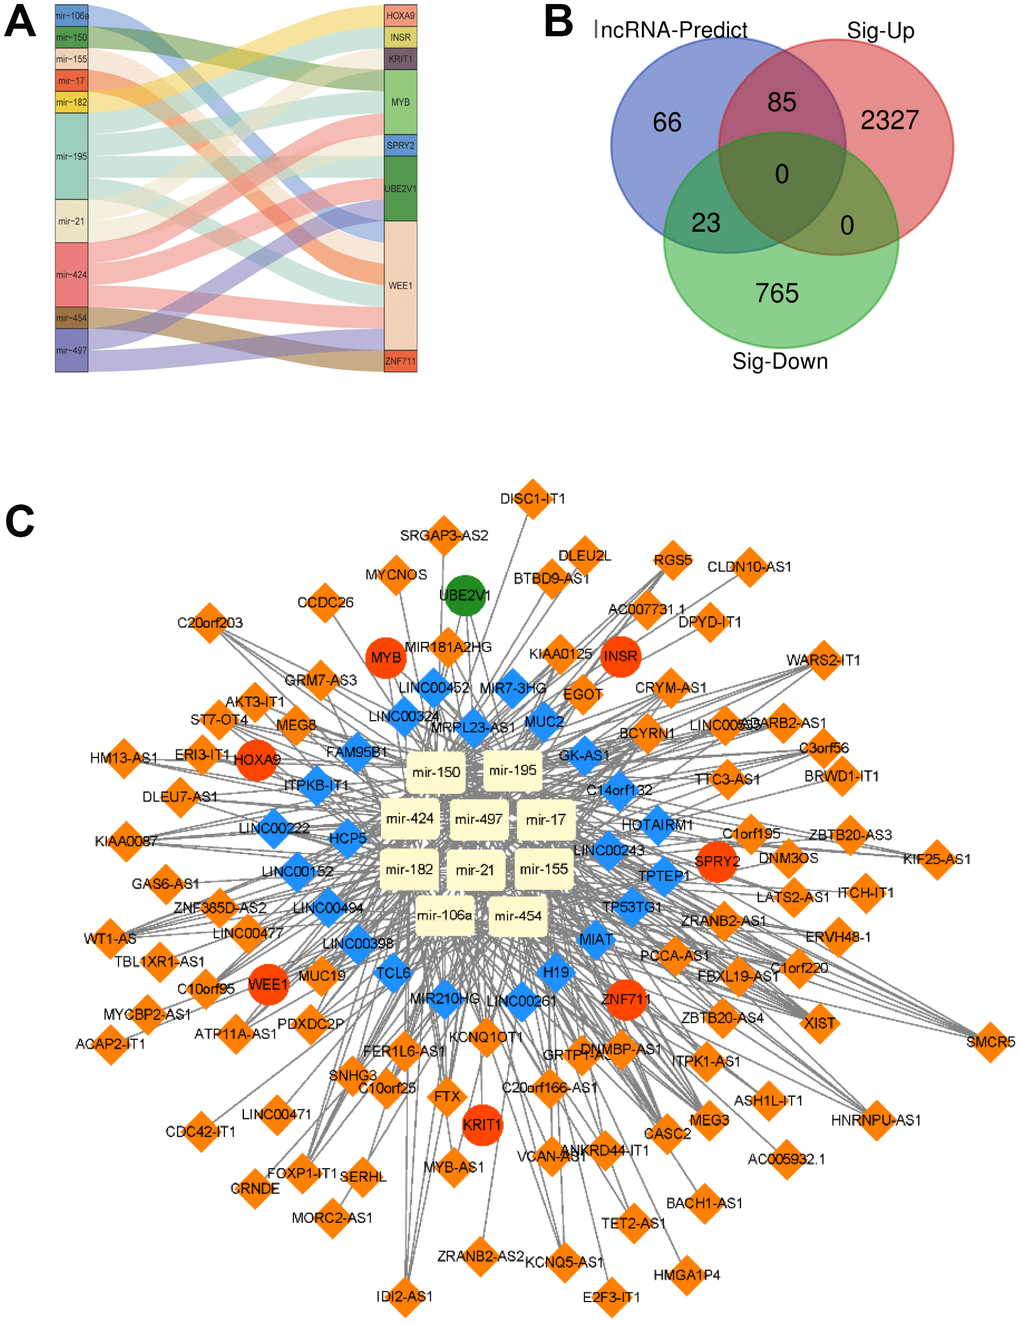 A lncRNA-miRNA-mRNA ceRNA network is constructed. (A) The relationship between the 8 target genes and their corresponding miRNA was shown. (B) Overlapped lncRNAs were analyzed by the predicted lncRNAs, significantly up-regulated lncRNAs and down-regulated lncRNAs. (C) A lncRNA-miRNA-mRNA ceRNA network was constructed by 108 lncRNAs, 10 miRNAs and 8 mRNAs for AML prognosis.